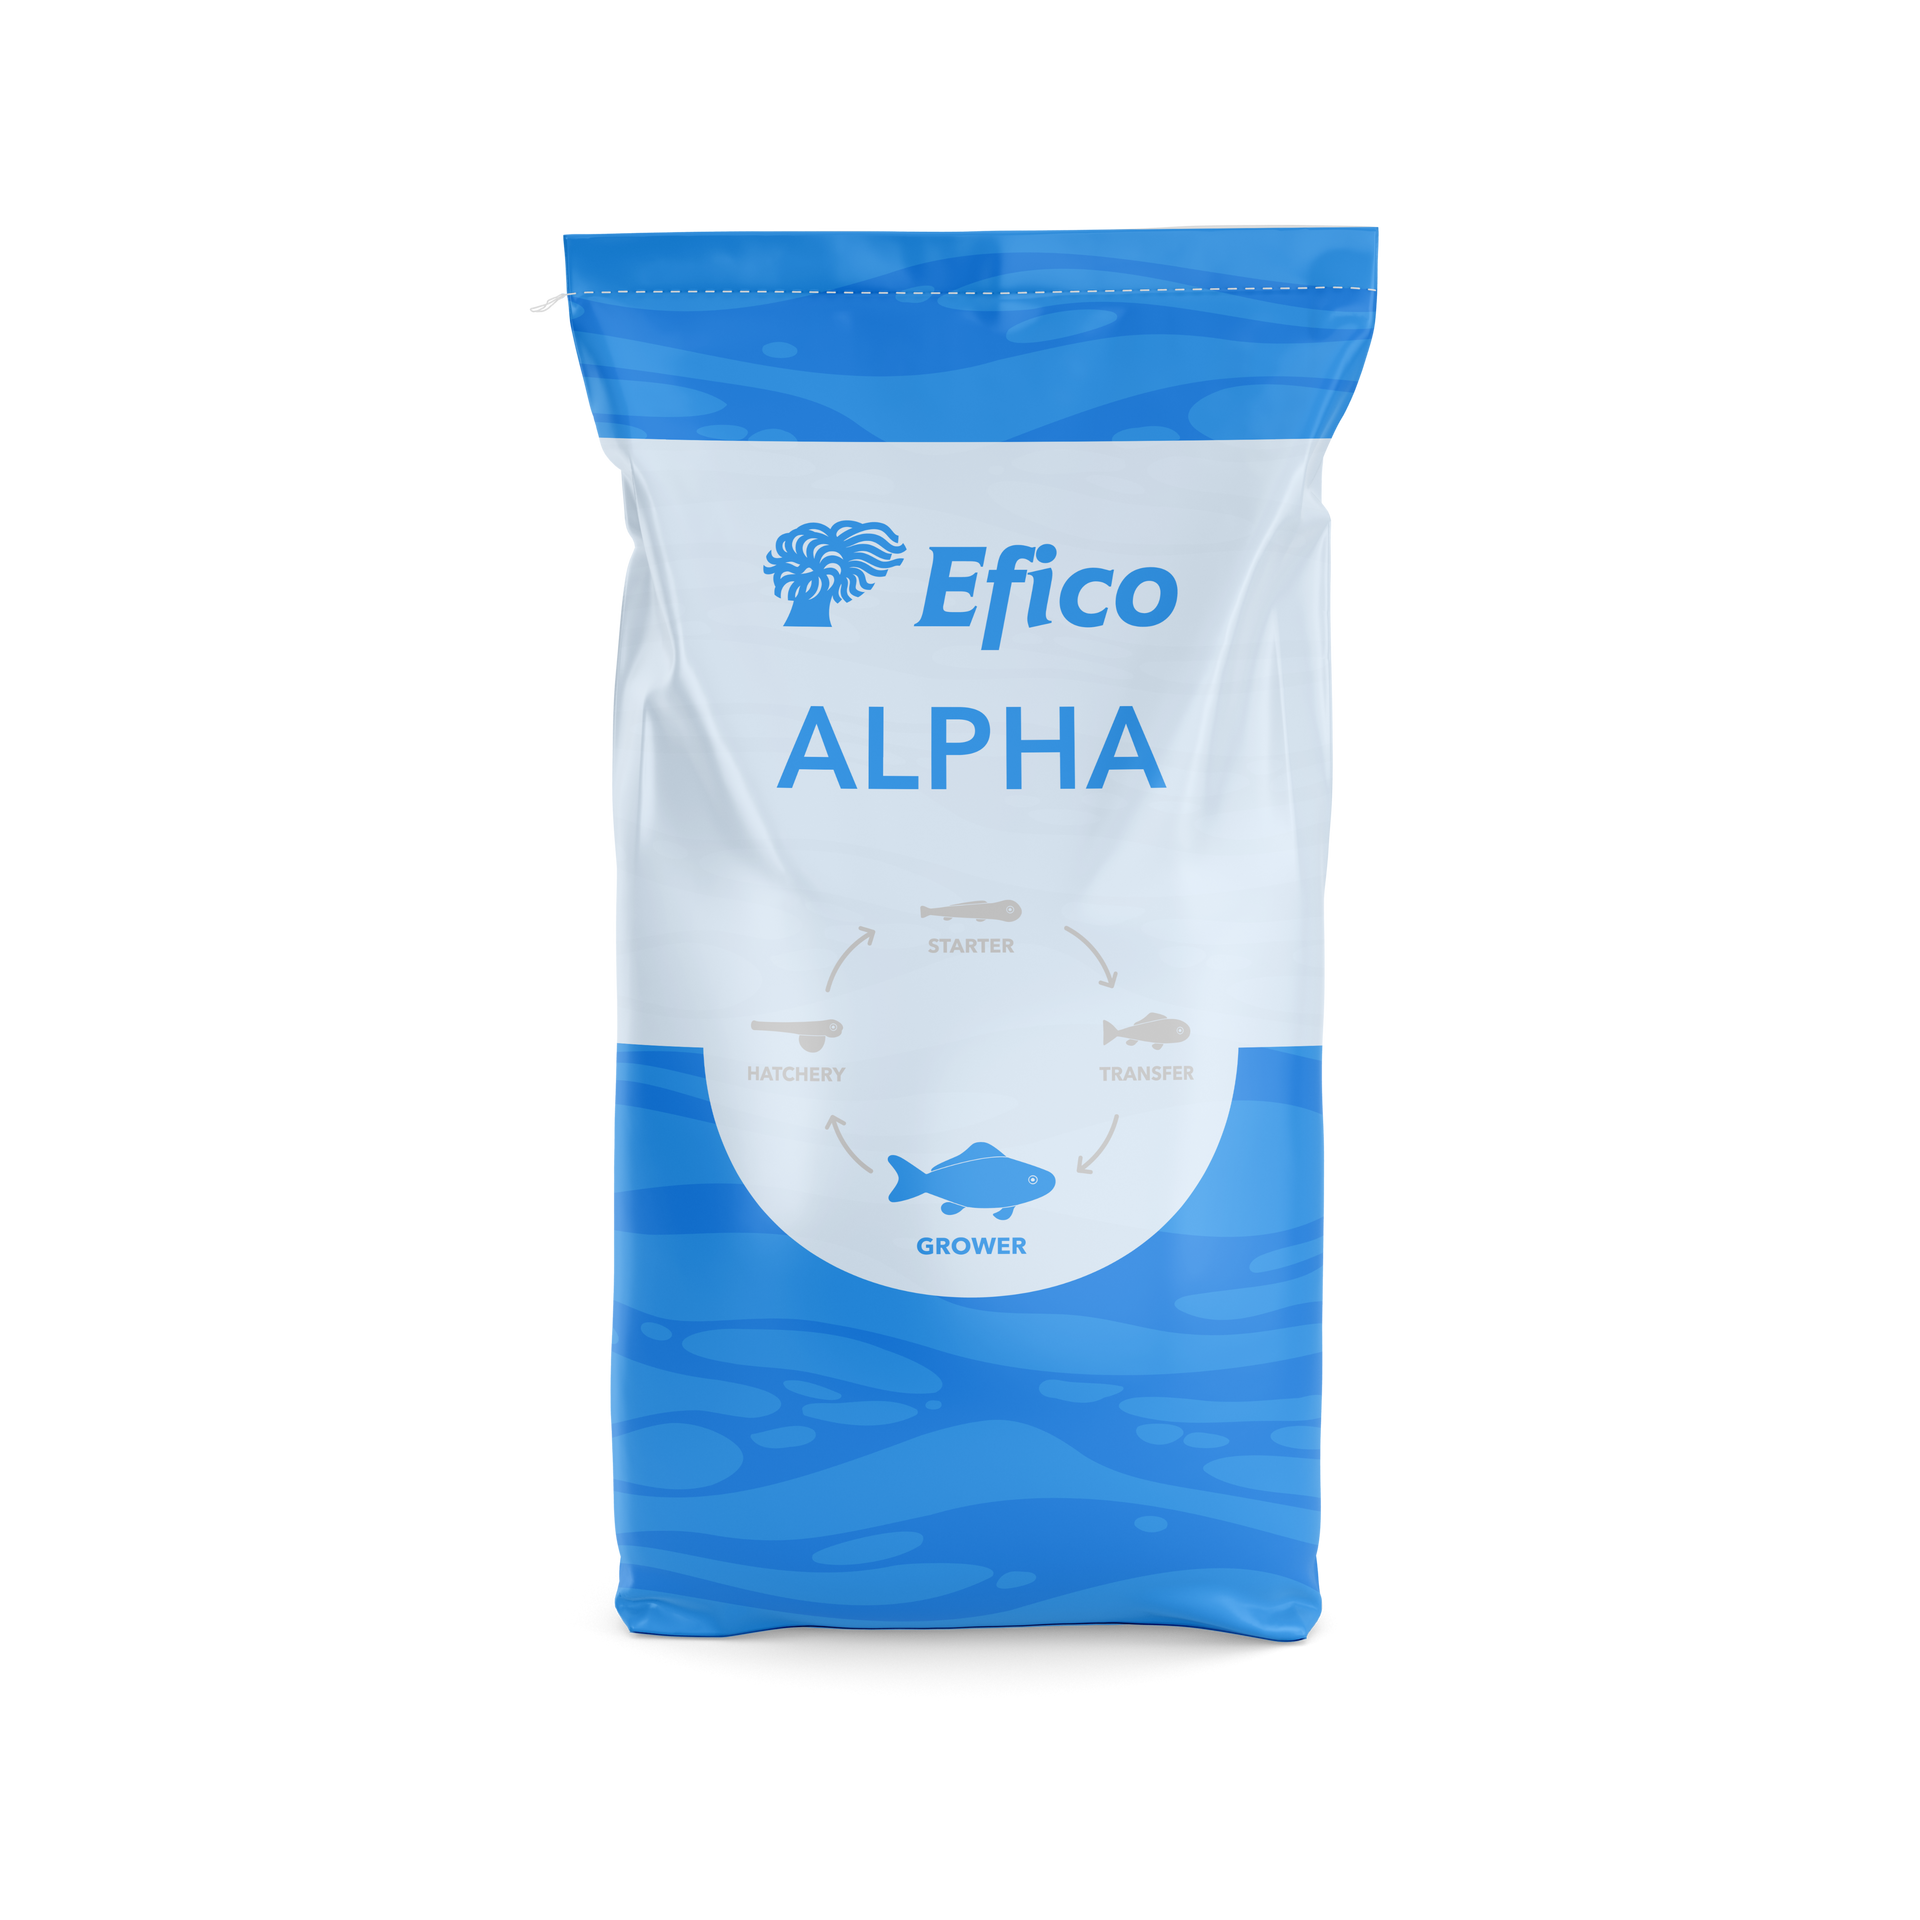 Efico Alpha feed for fish